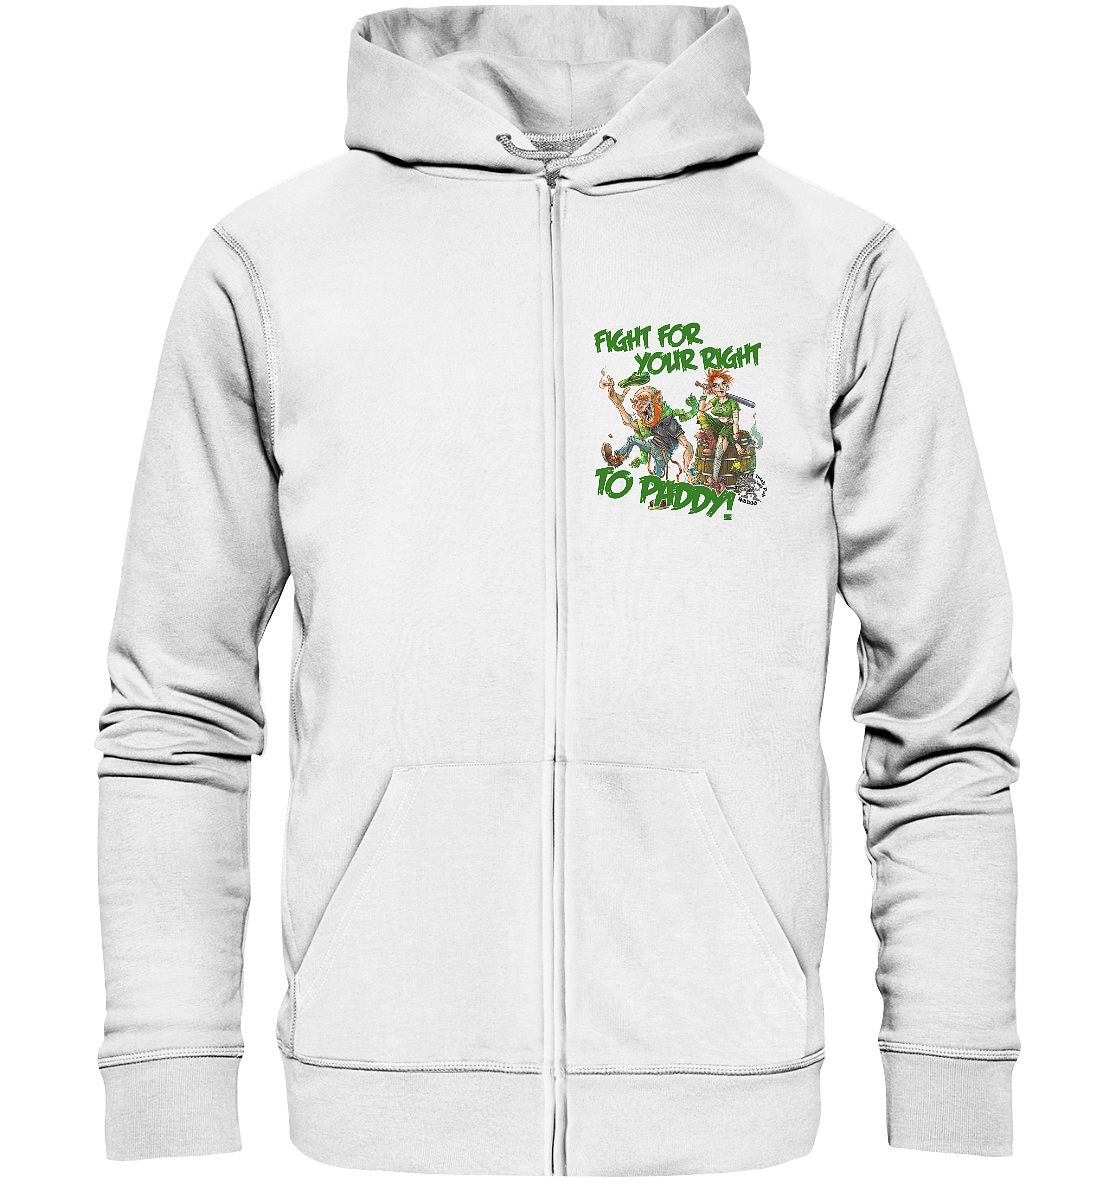 Fight For Your Right To Paddy - Organic Zipper